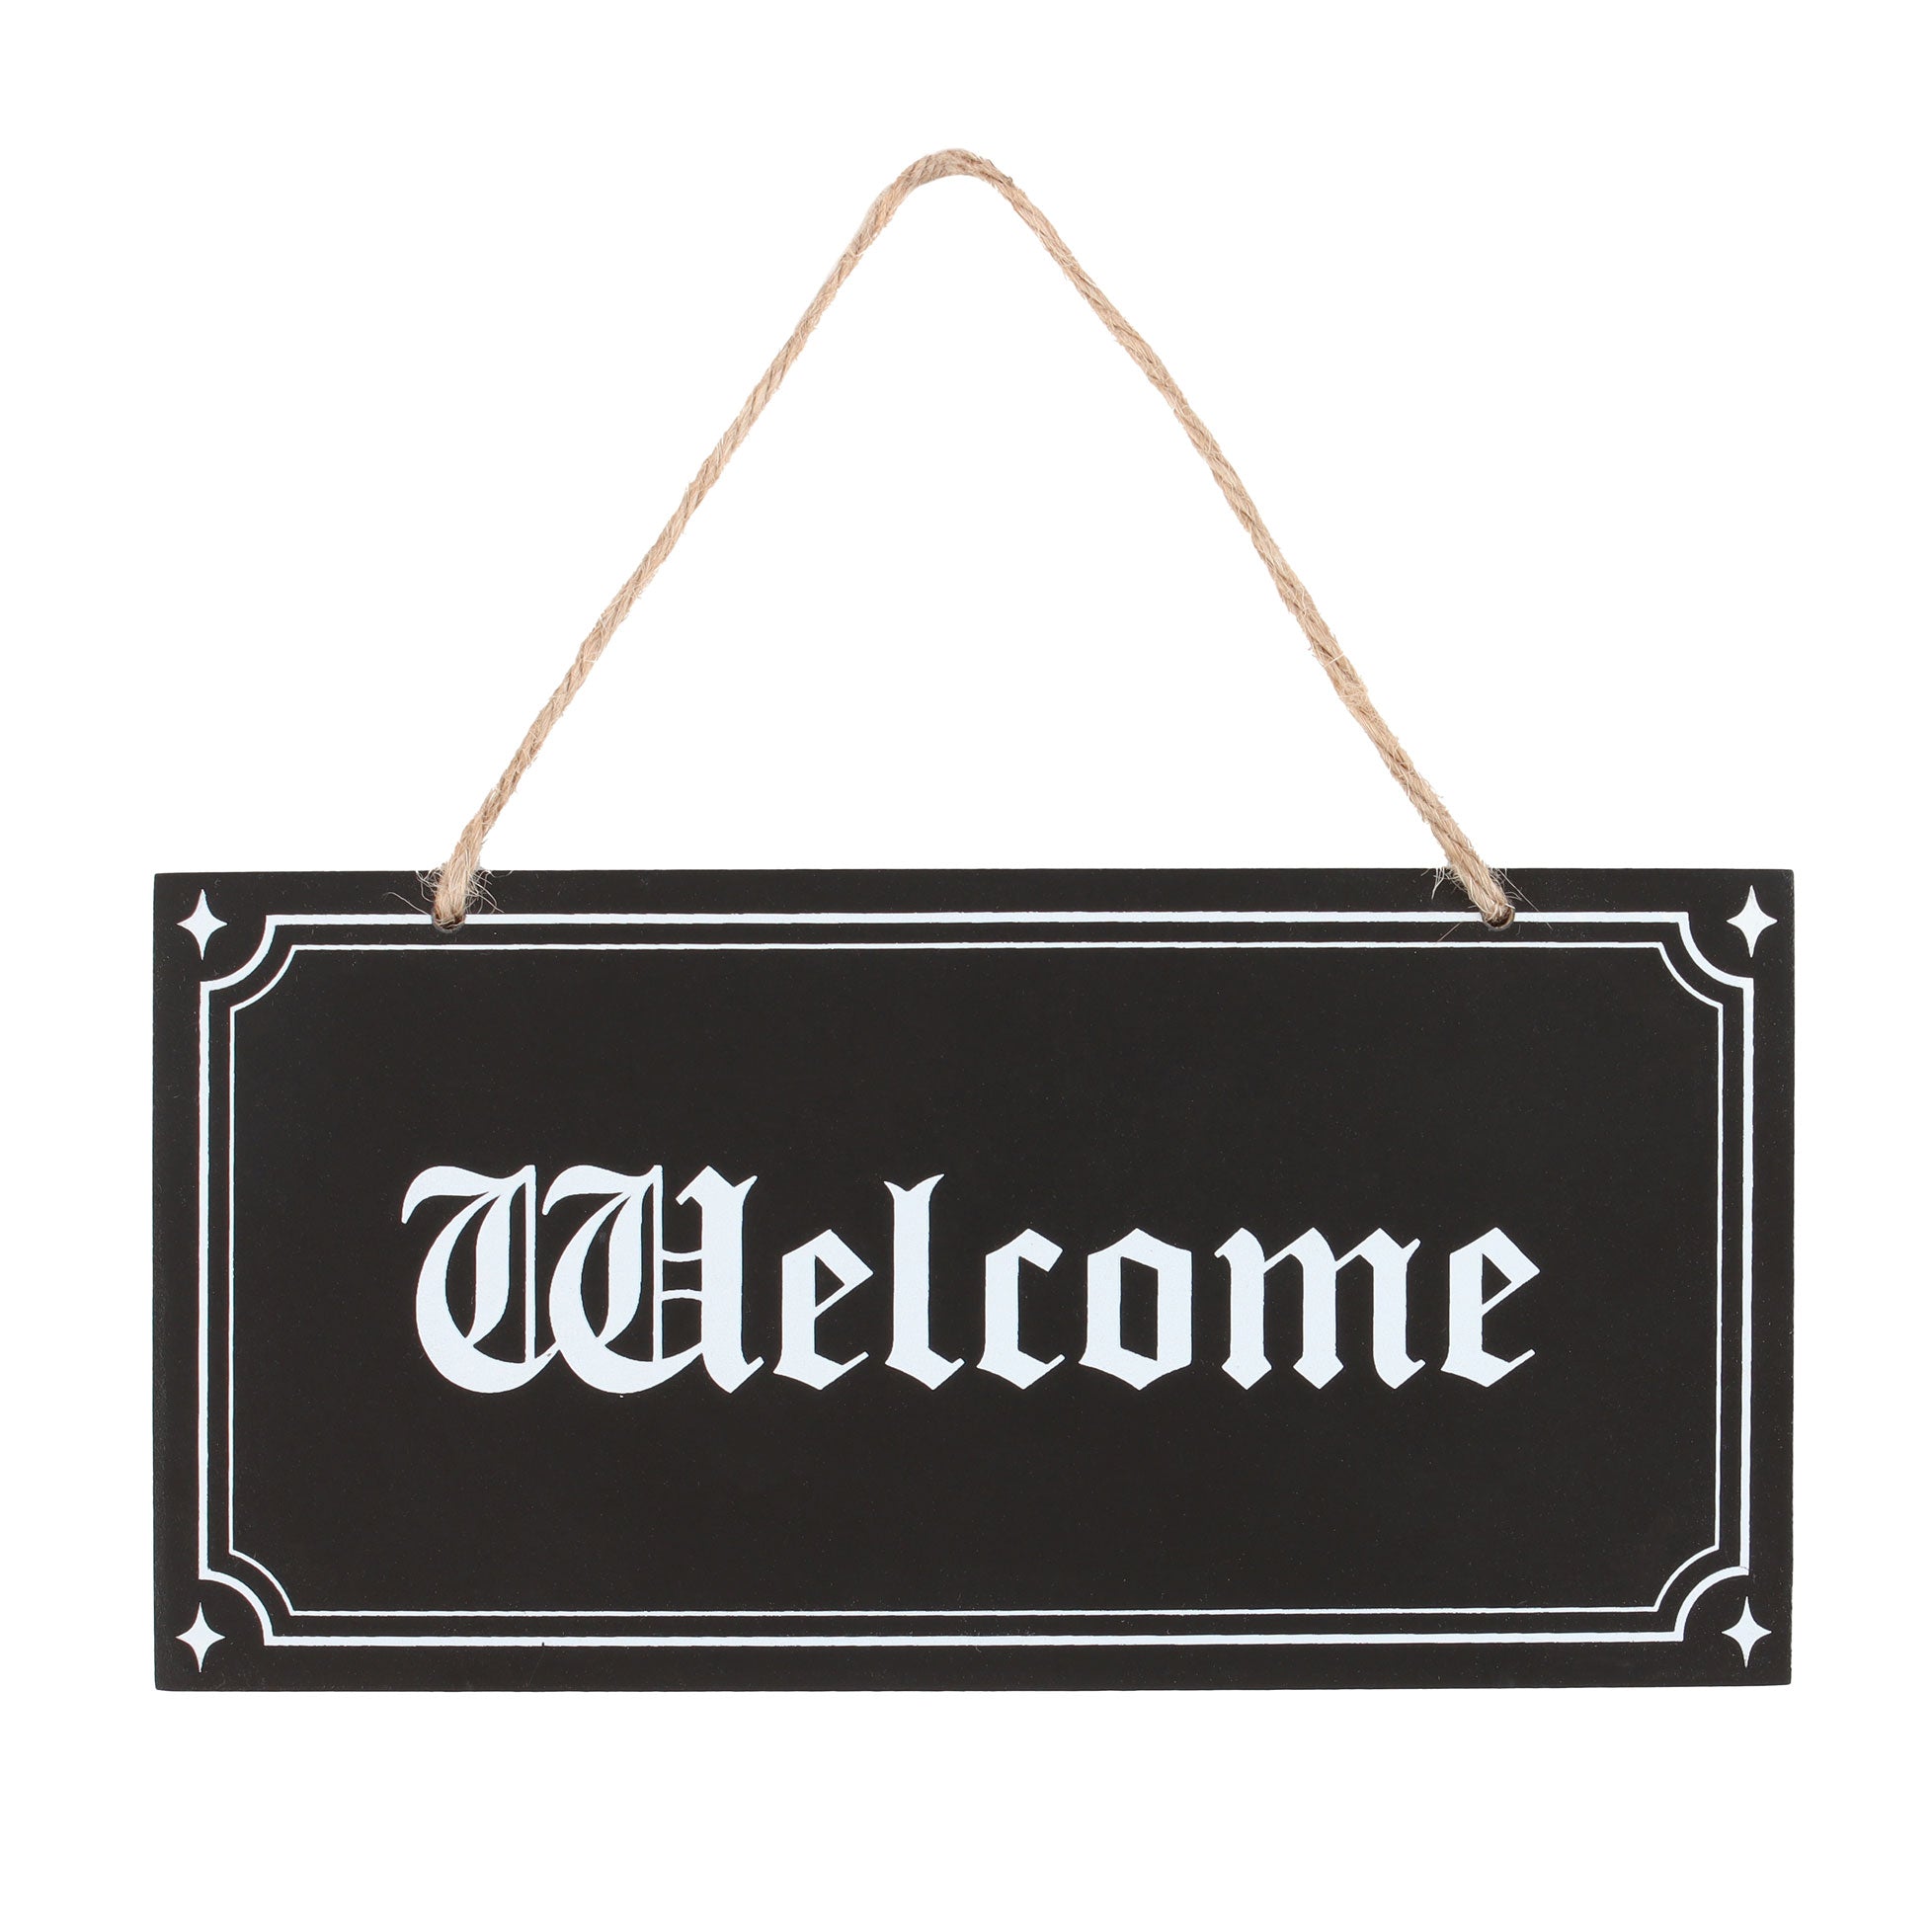 View Gothic Welcome Hanging Sign information